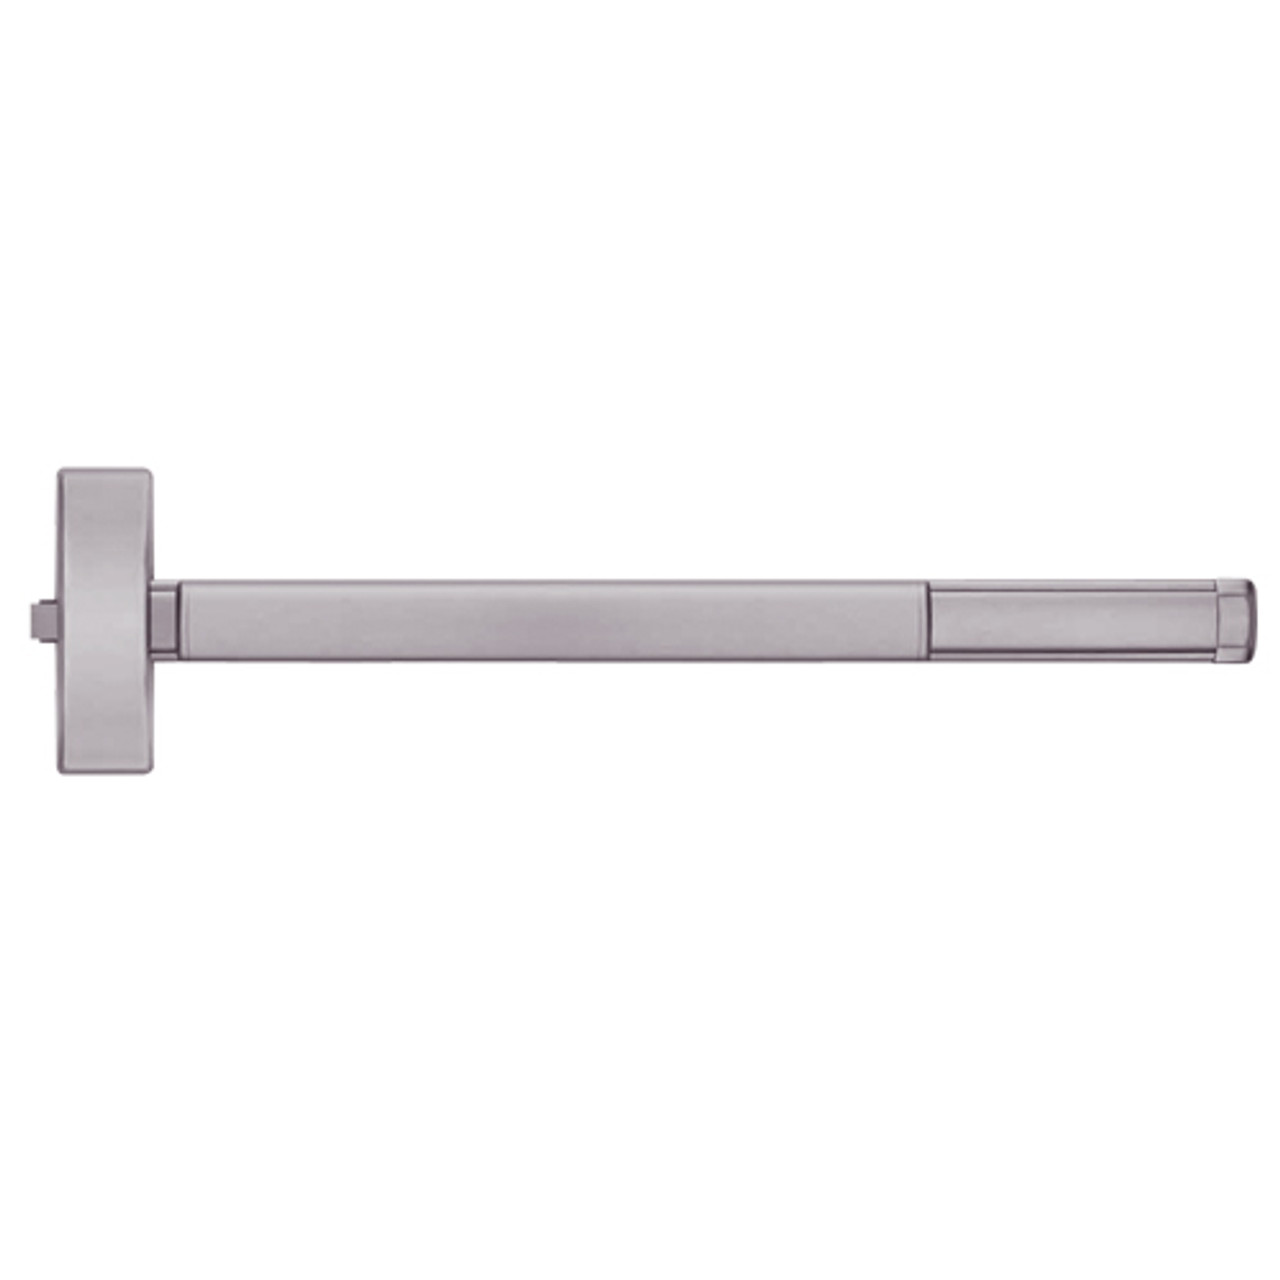 ELRFL2102-630-36 PHI 2100 Series Fire Rated Apex Rim Exit Device with Electric Latch Retraction Prepped for Dummy Trim in Satin Stainless Steel Finish